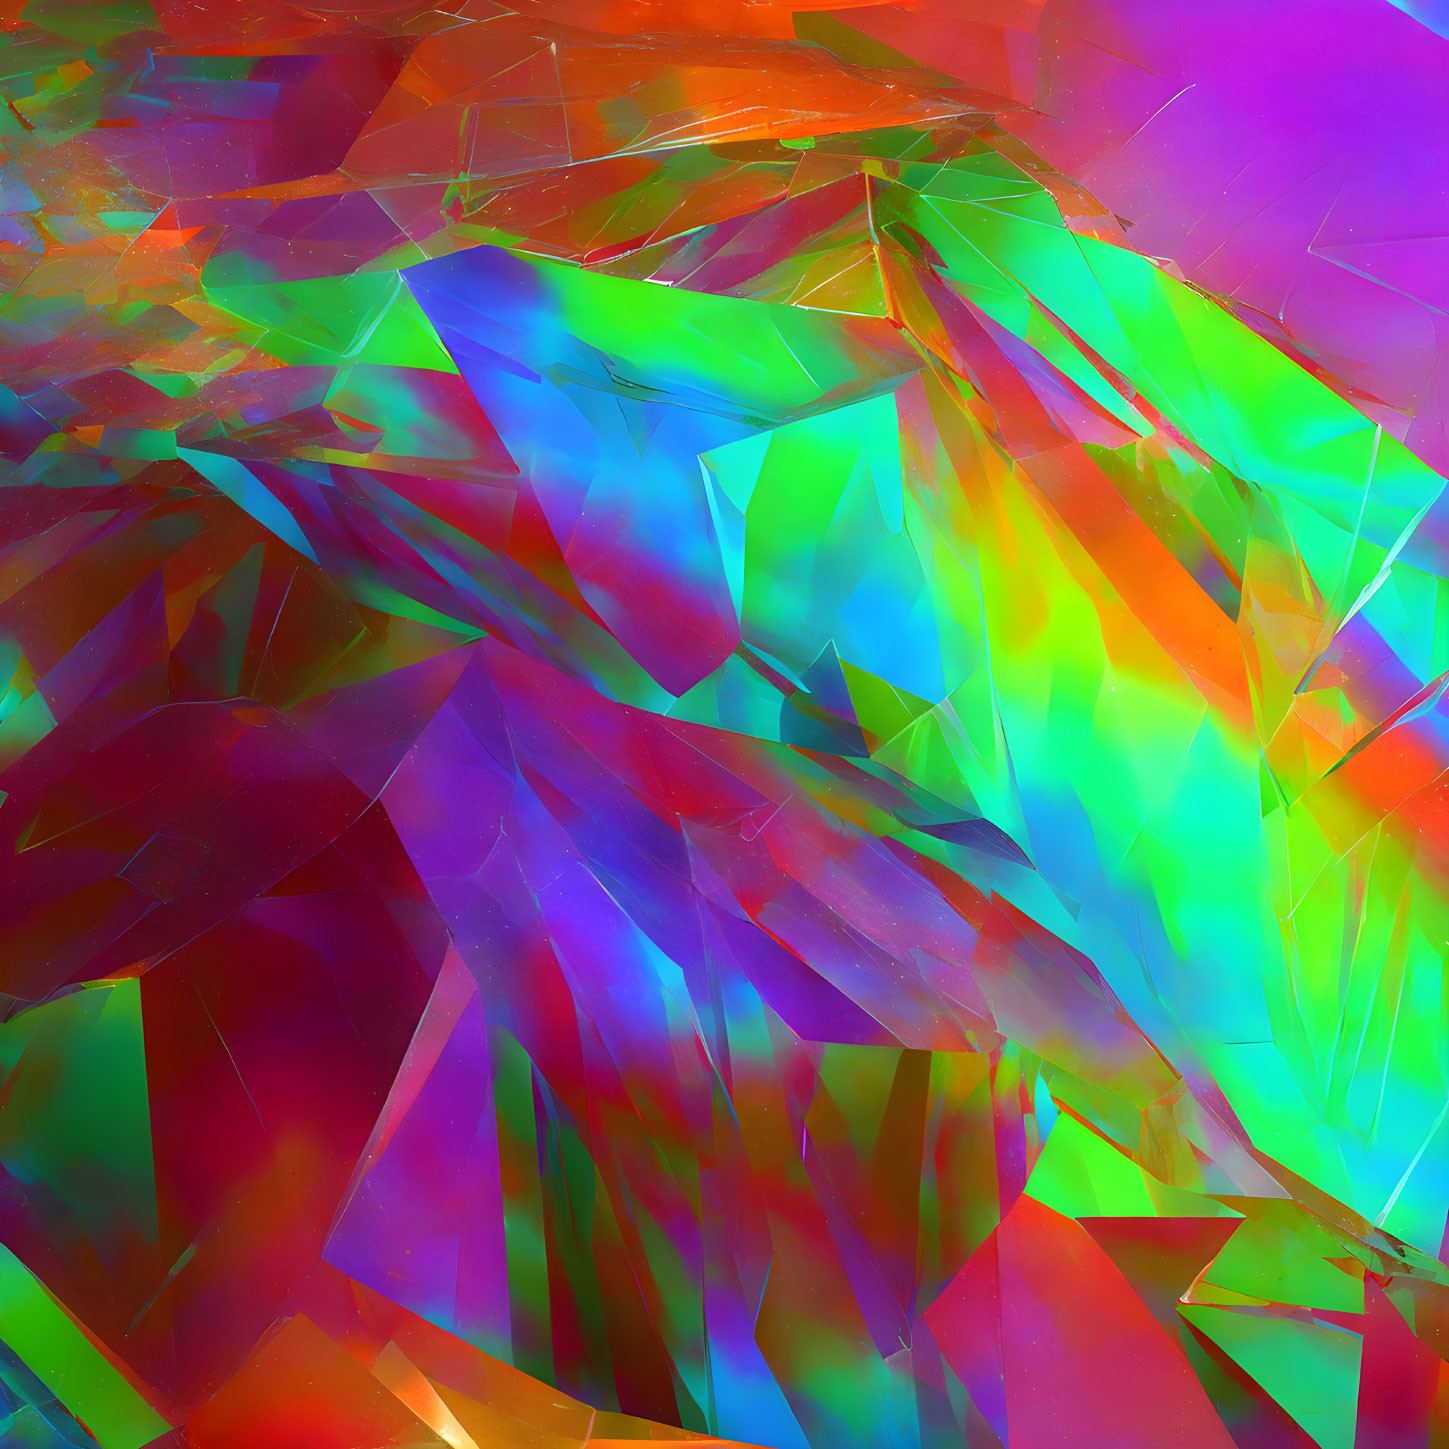 5D shattered prism crystal glitch photograph